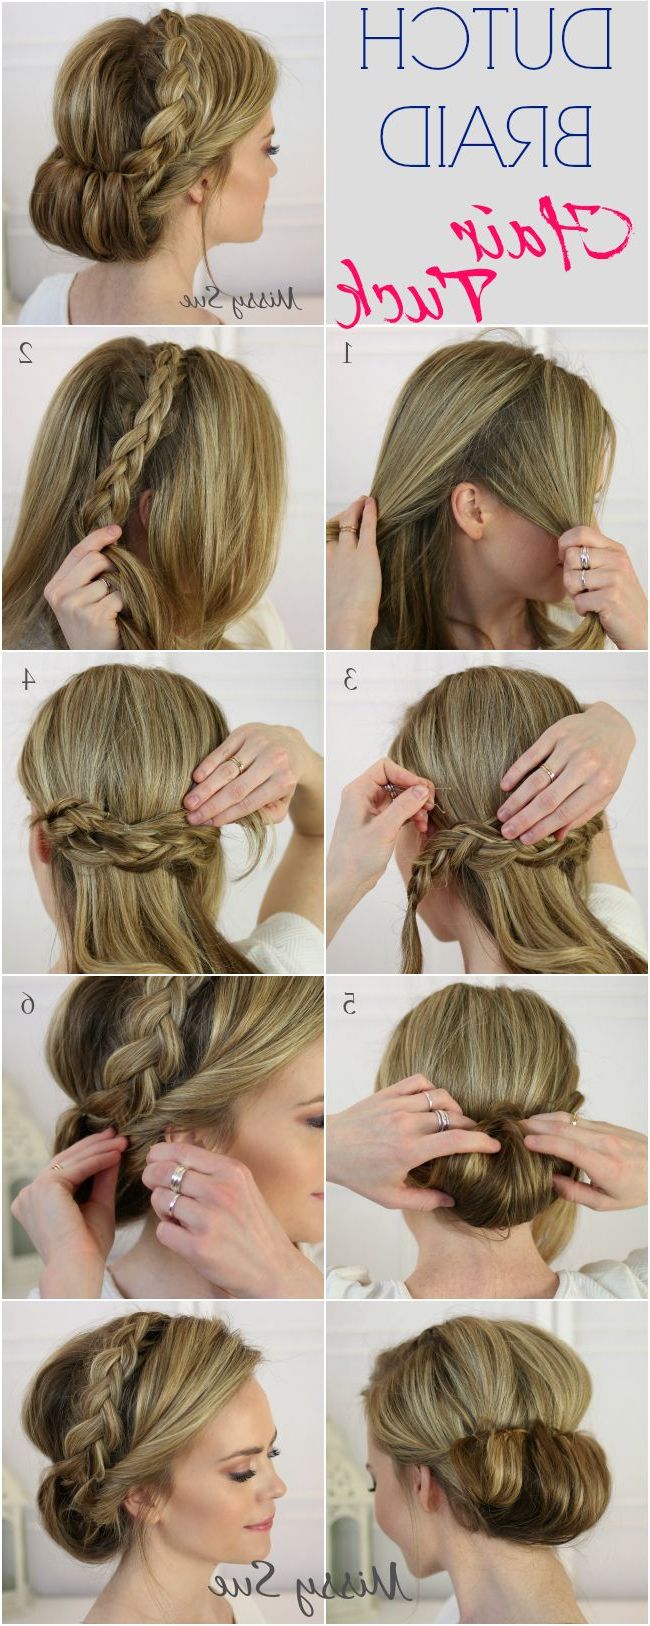 Famous Dutch Braid Updo Hairstyles For 17 Stunning Dutch Braid Hairstyles With Tutorials – Pretty (View 18 of 20)